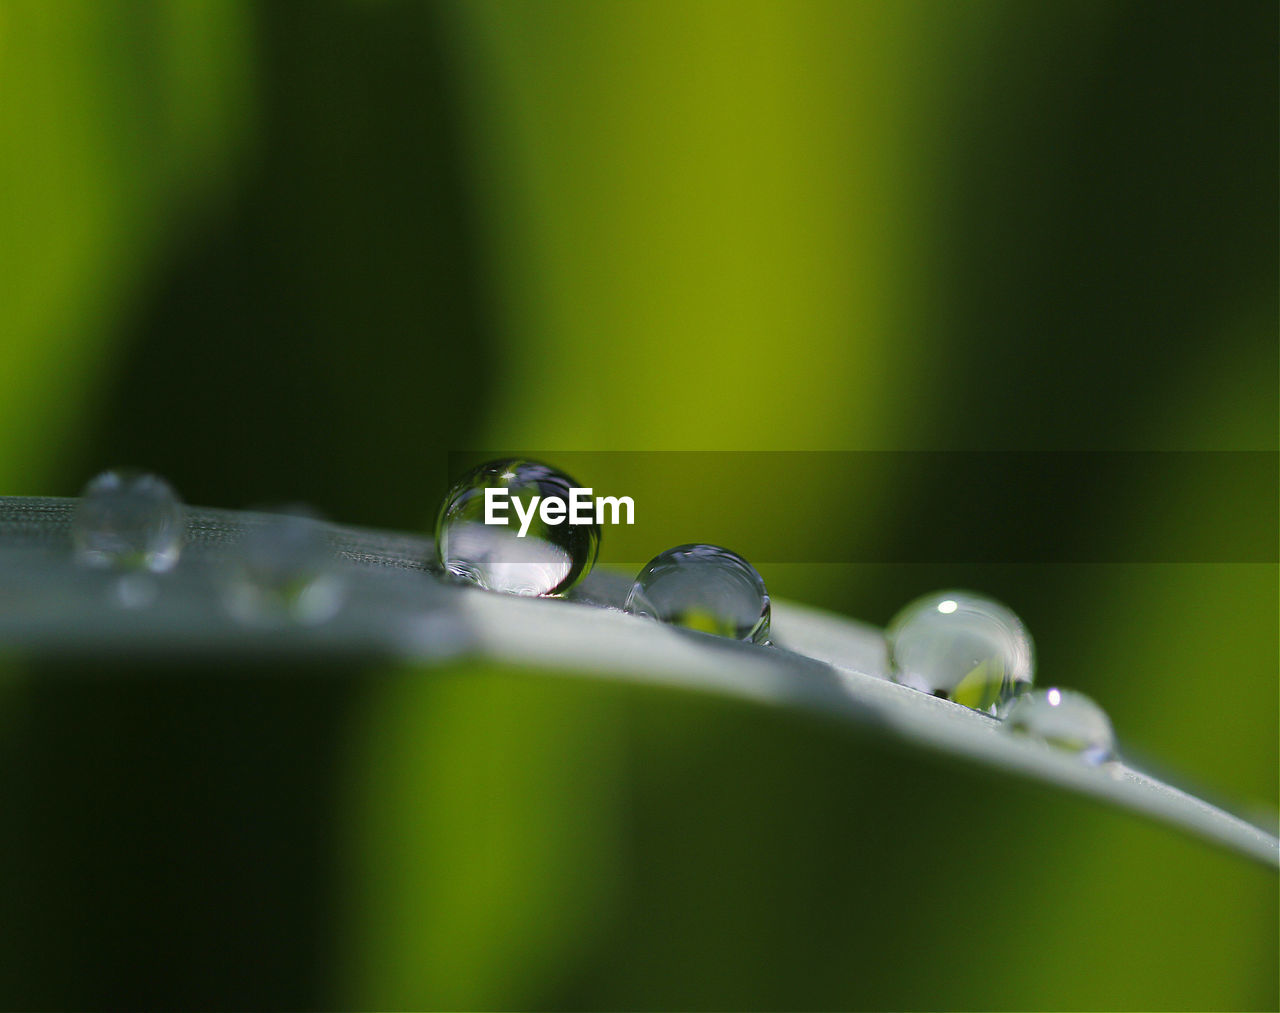 Extreme close-up of dew drops on grass